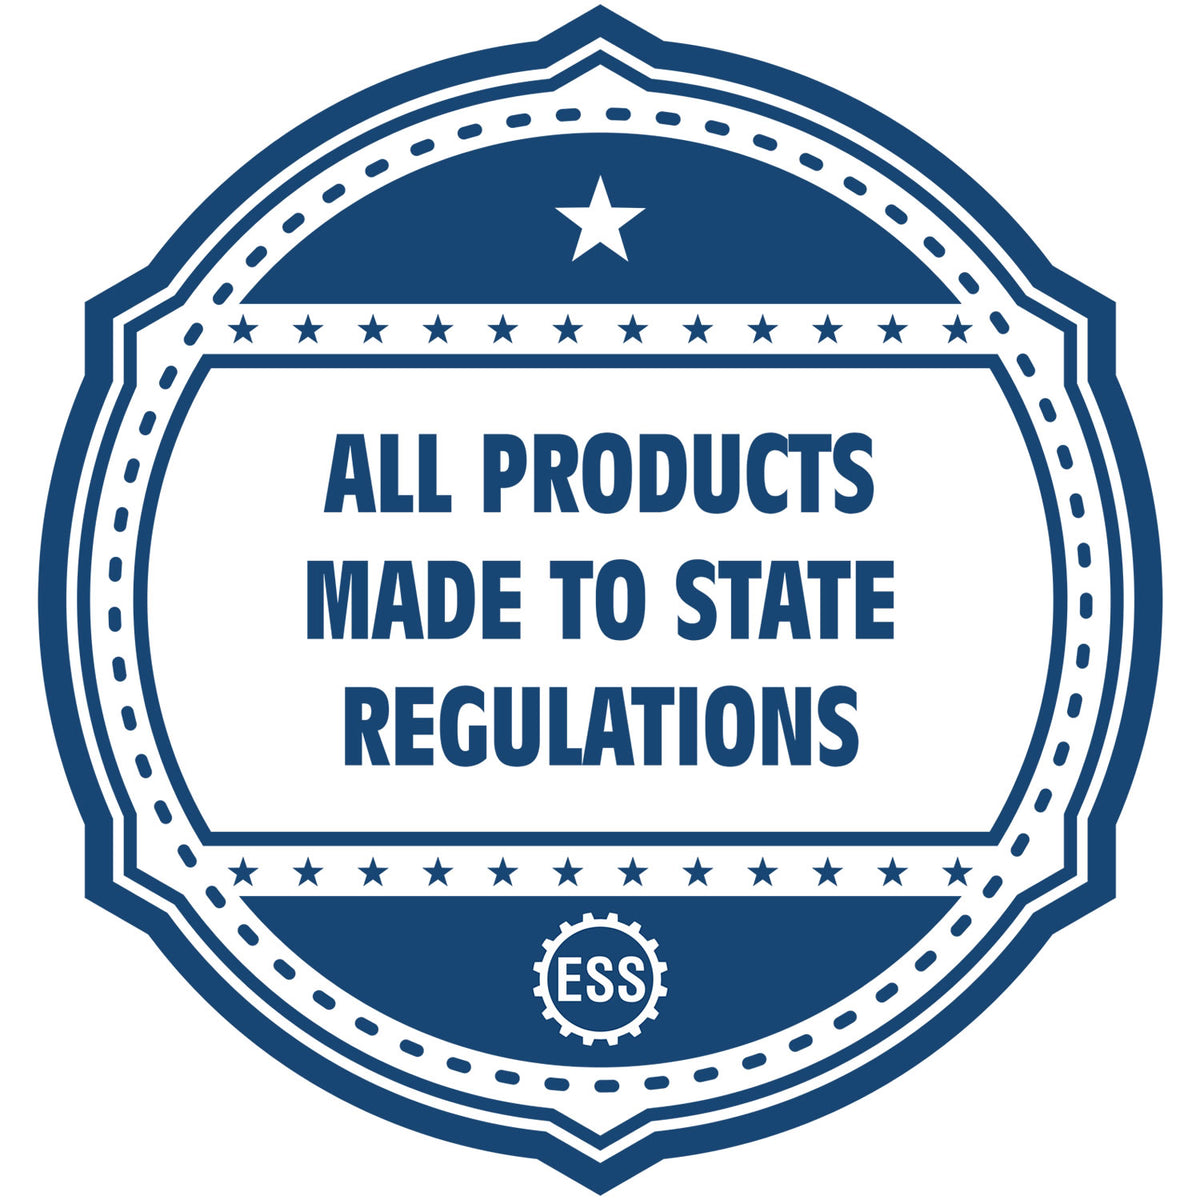 An icon or badge element for the Long Reach Utah PE Seal showing that this product is made in compliance with state regulations.